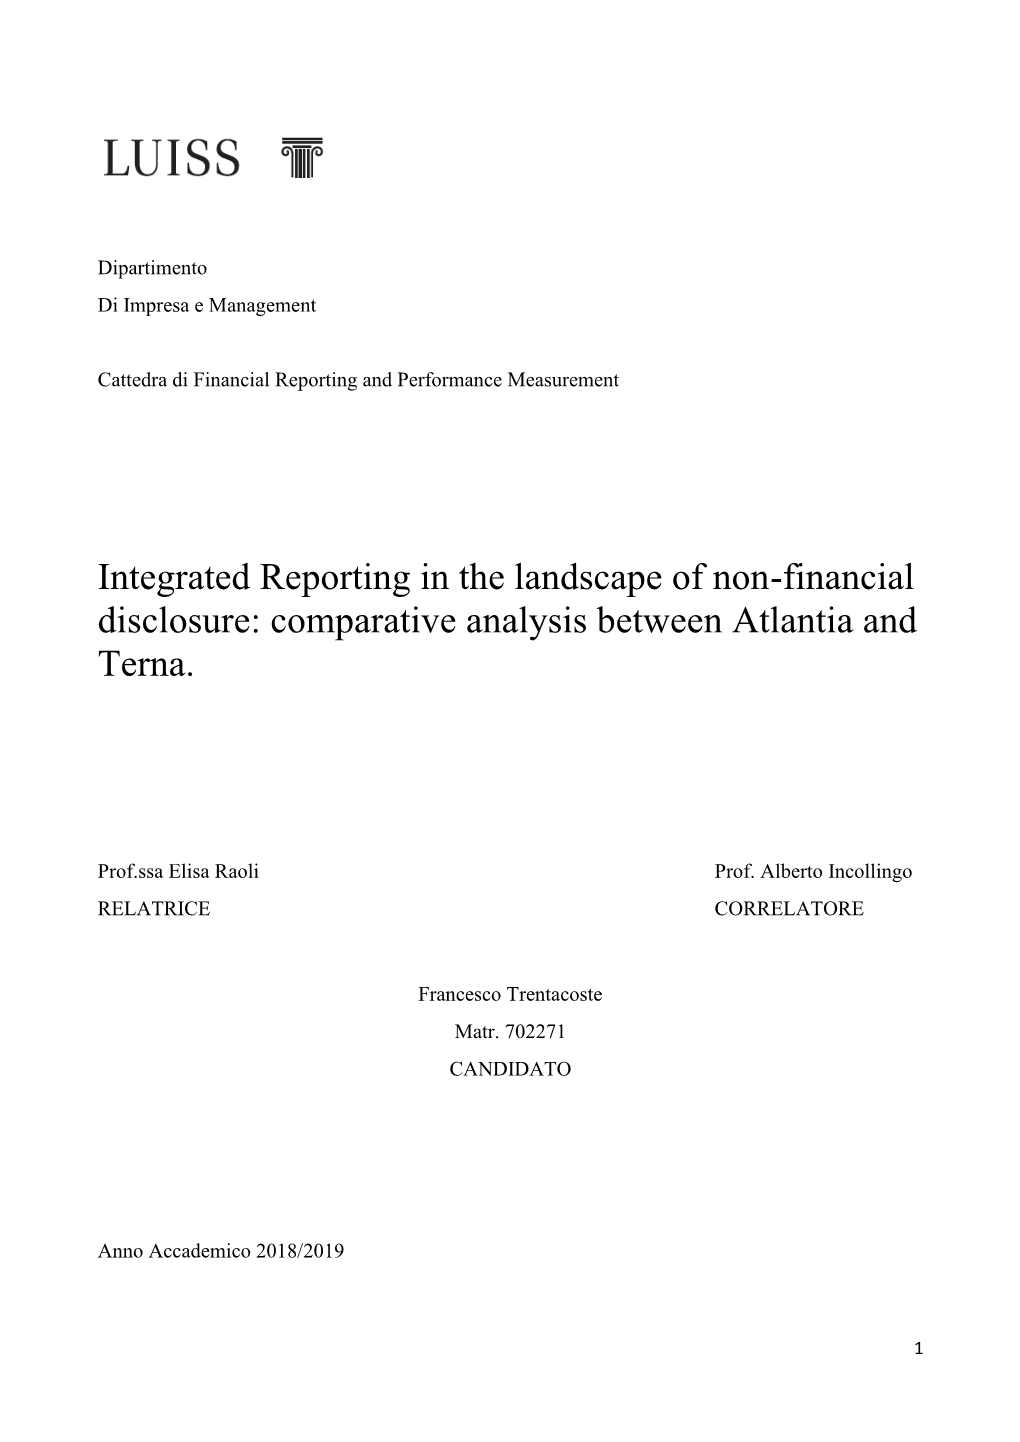 Integrated Reporting in the Landscape of Non-Financial Disclosure: Comparative Analysis Between Atlantia and Terna